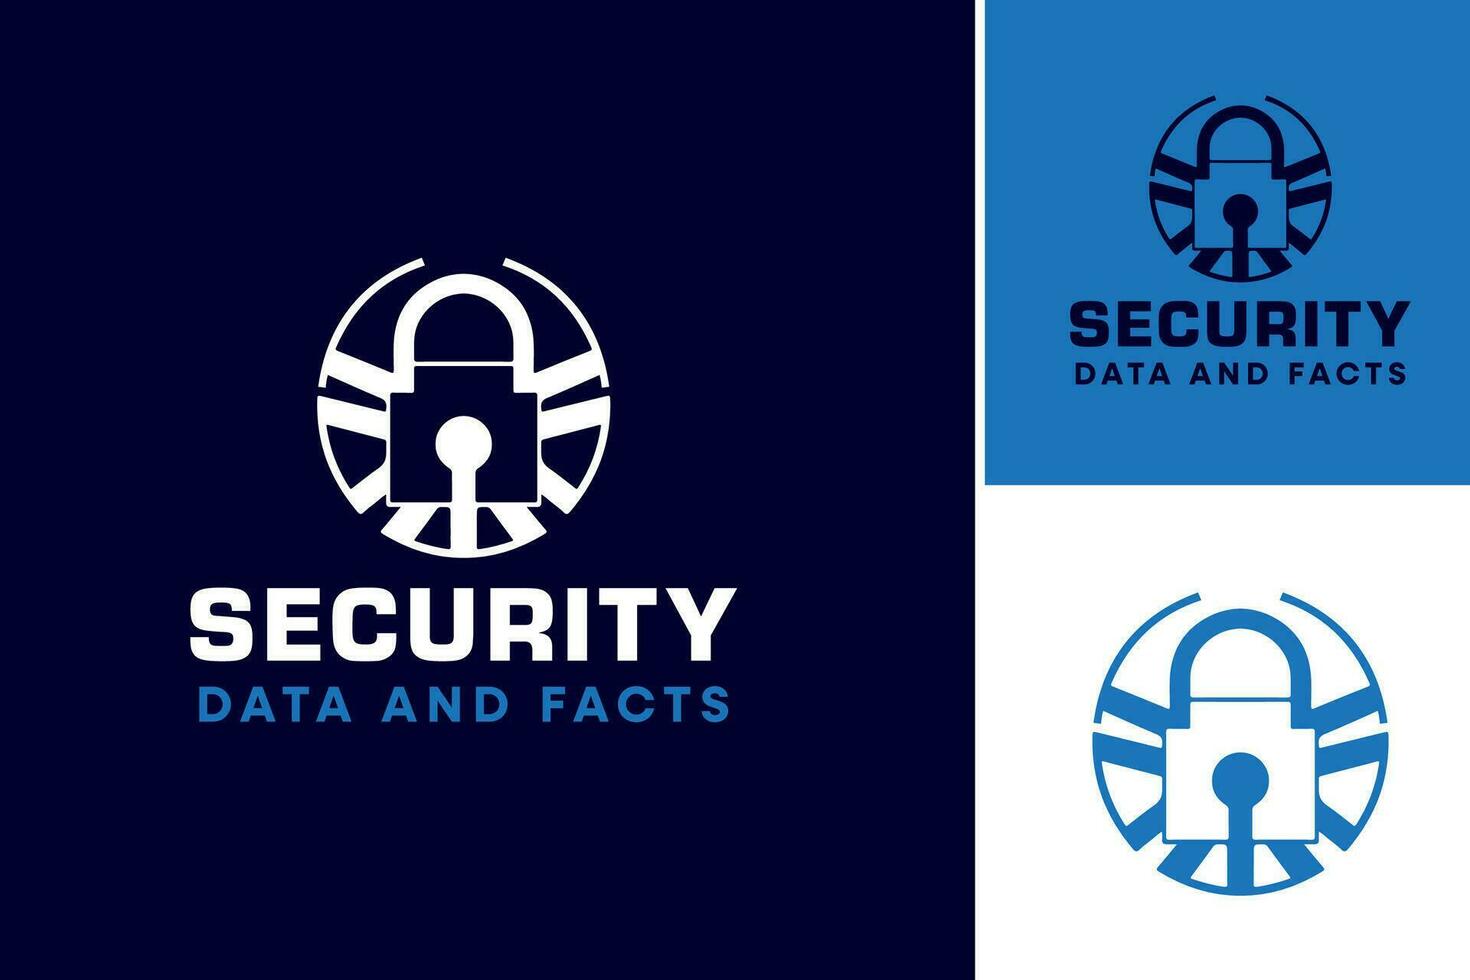 Security Data Protection Logo is a design asset suitable for businesses or organizations that specialize in providing security and protection for data. It can be used as a logo for their brand vector